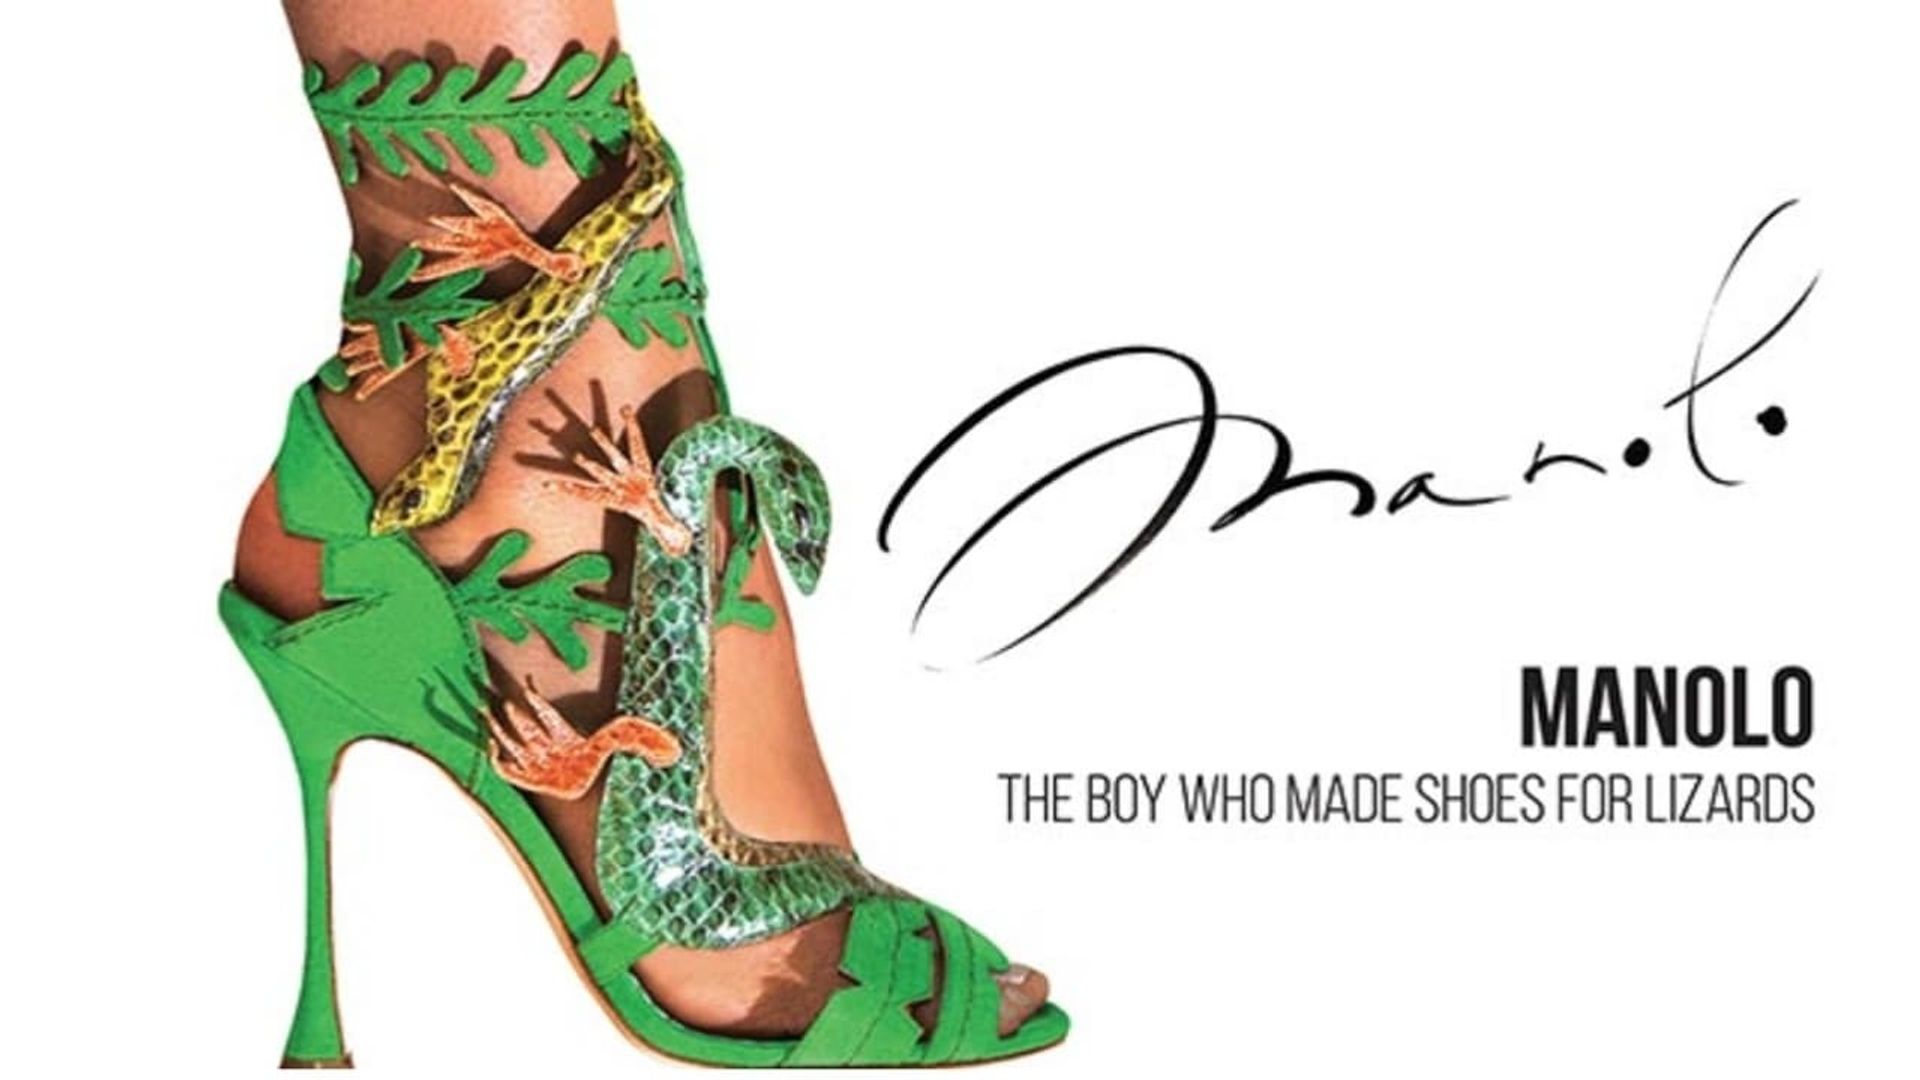 Manolo: The Boy Who Made Shoes for Lizards background